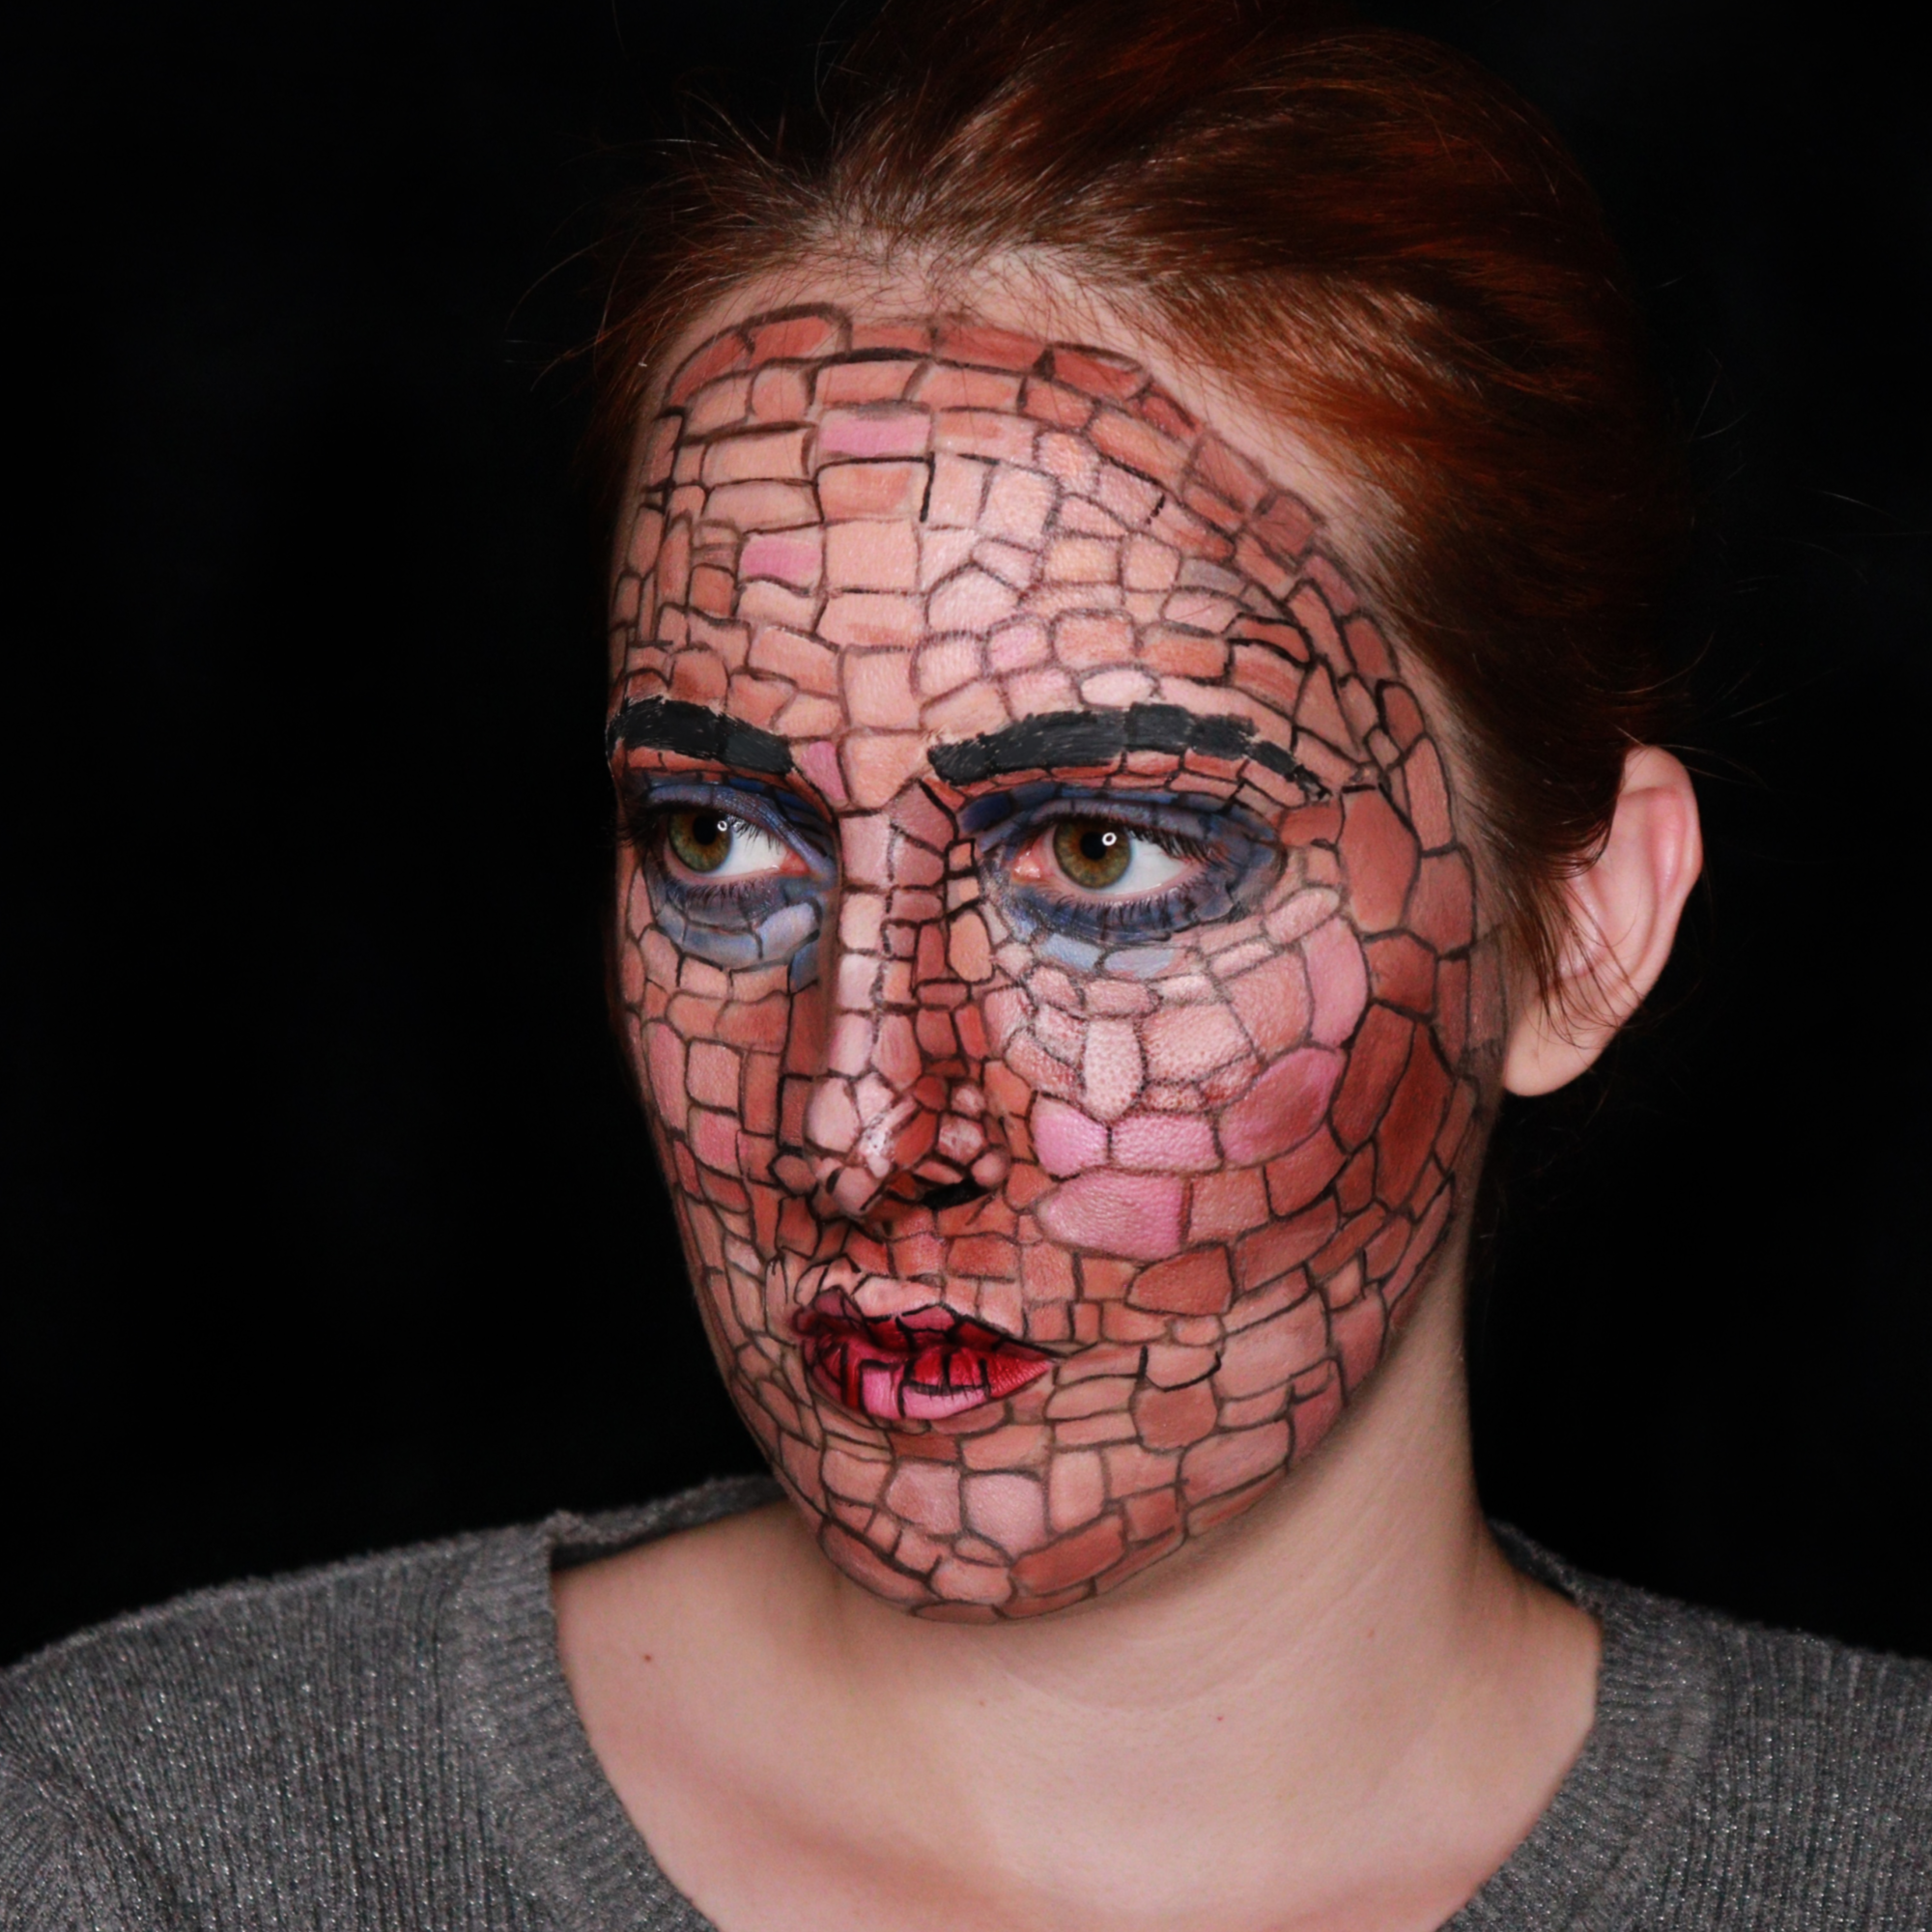 Mosaic Face Paint Design Video by Ana Cedoviste